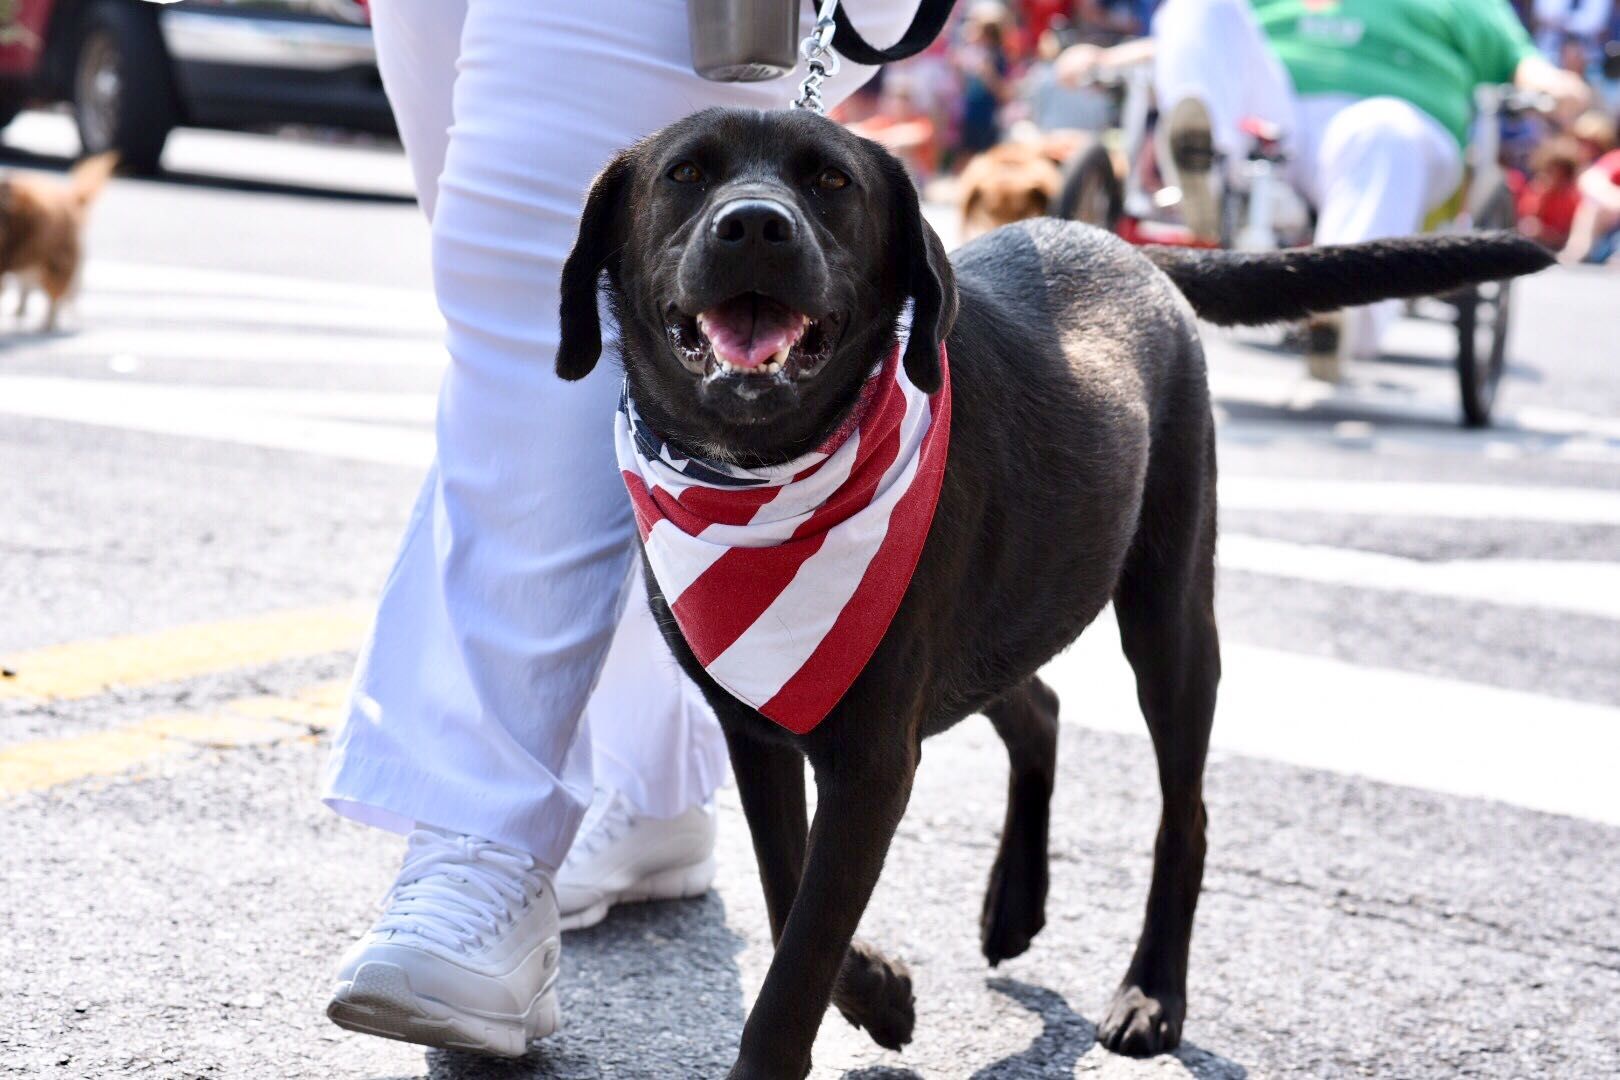 One of the members of the Greenbelt Dog Training Marching Drill Team at the Takoma Park Parade. (WTOP/Kate Ryan)